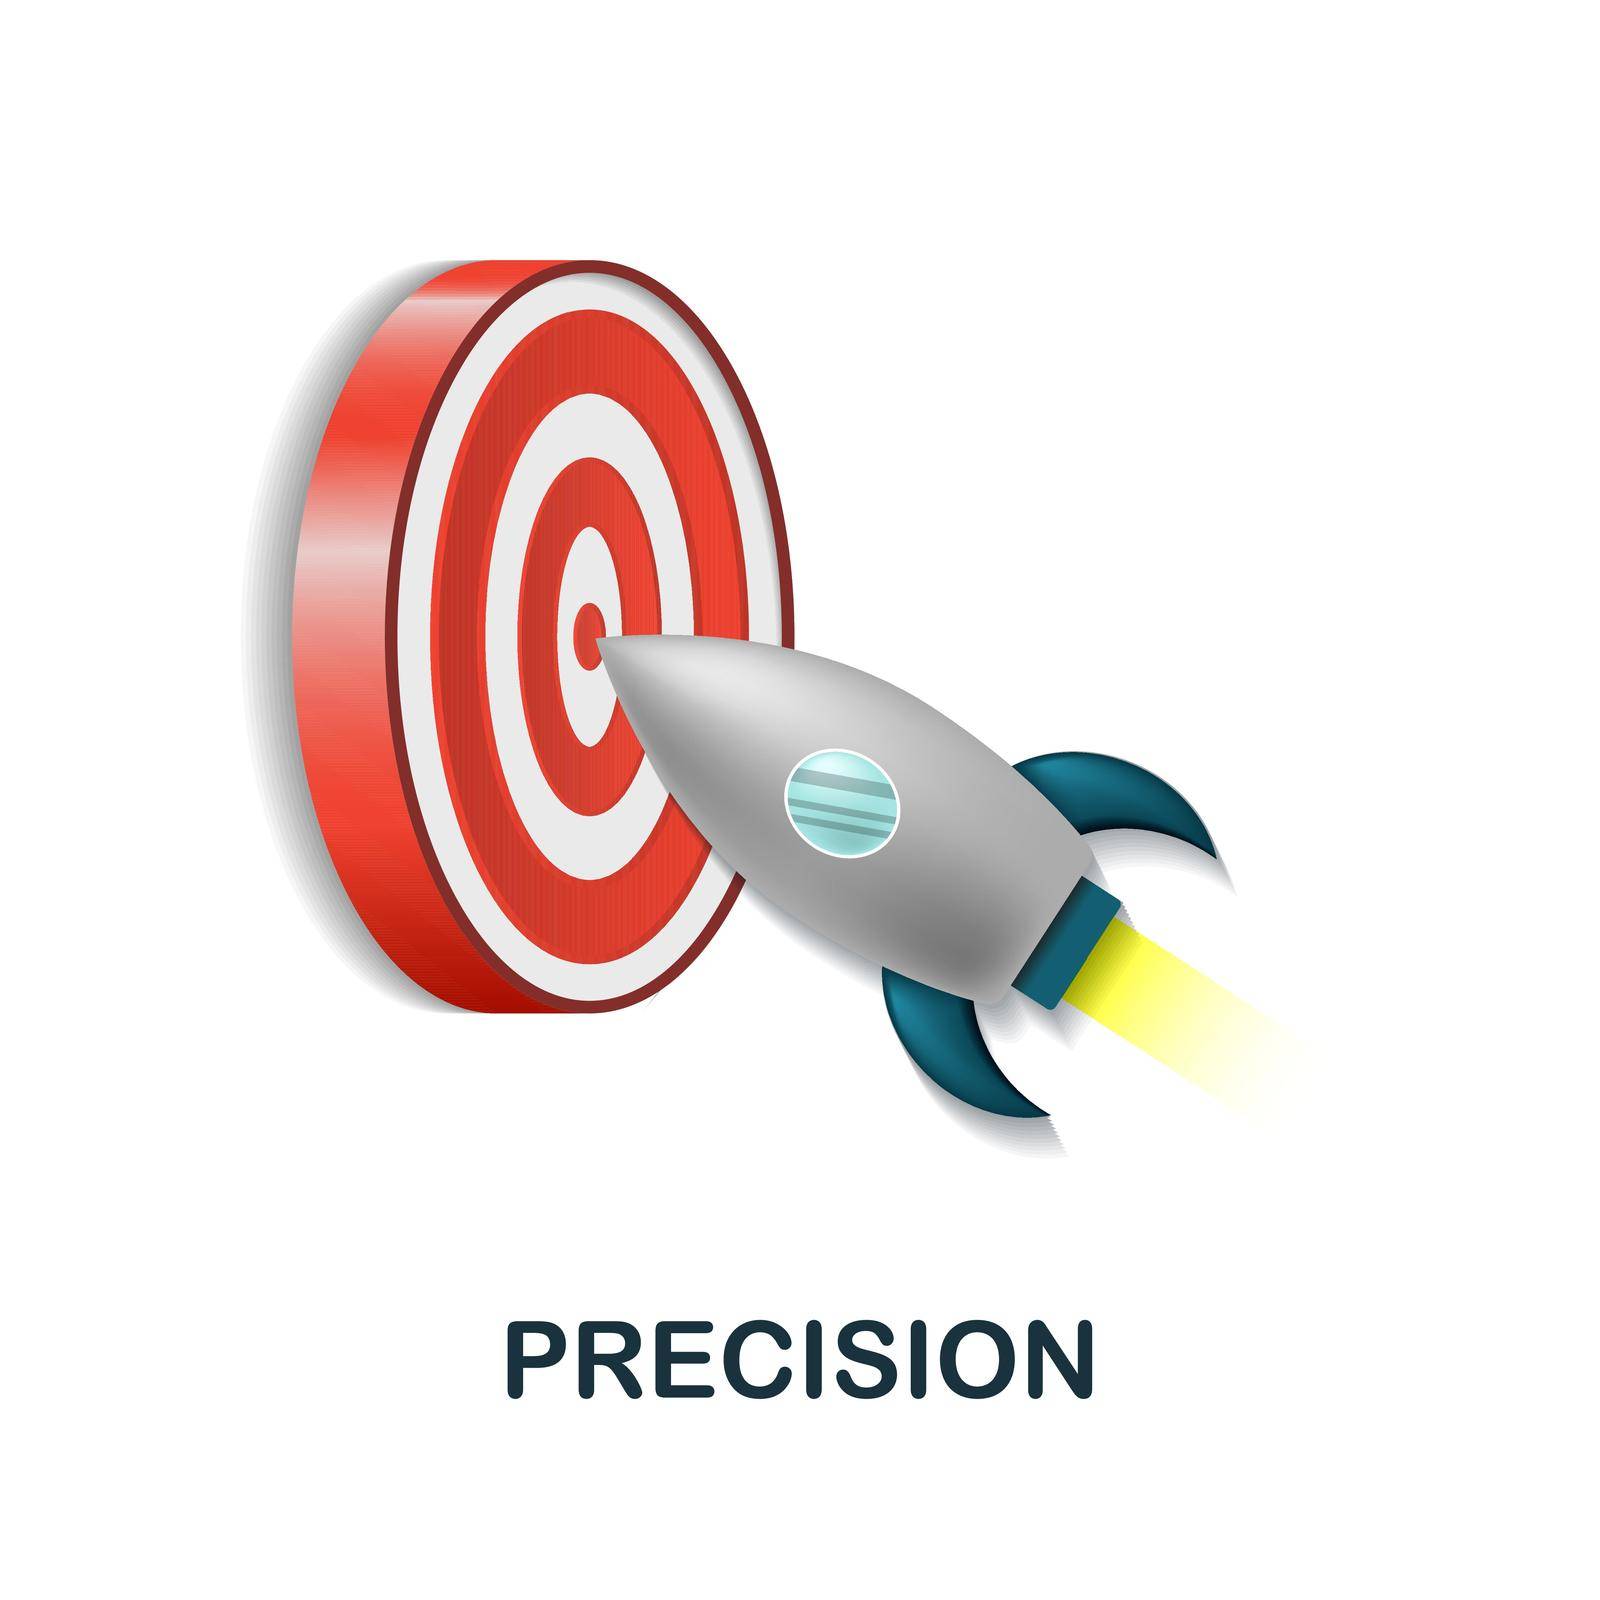 Precision icon. 3d illustration from startup collection. Creative Precision 3d icon for web design, templates, infographics and more.